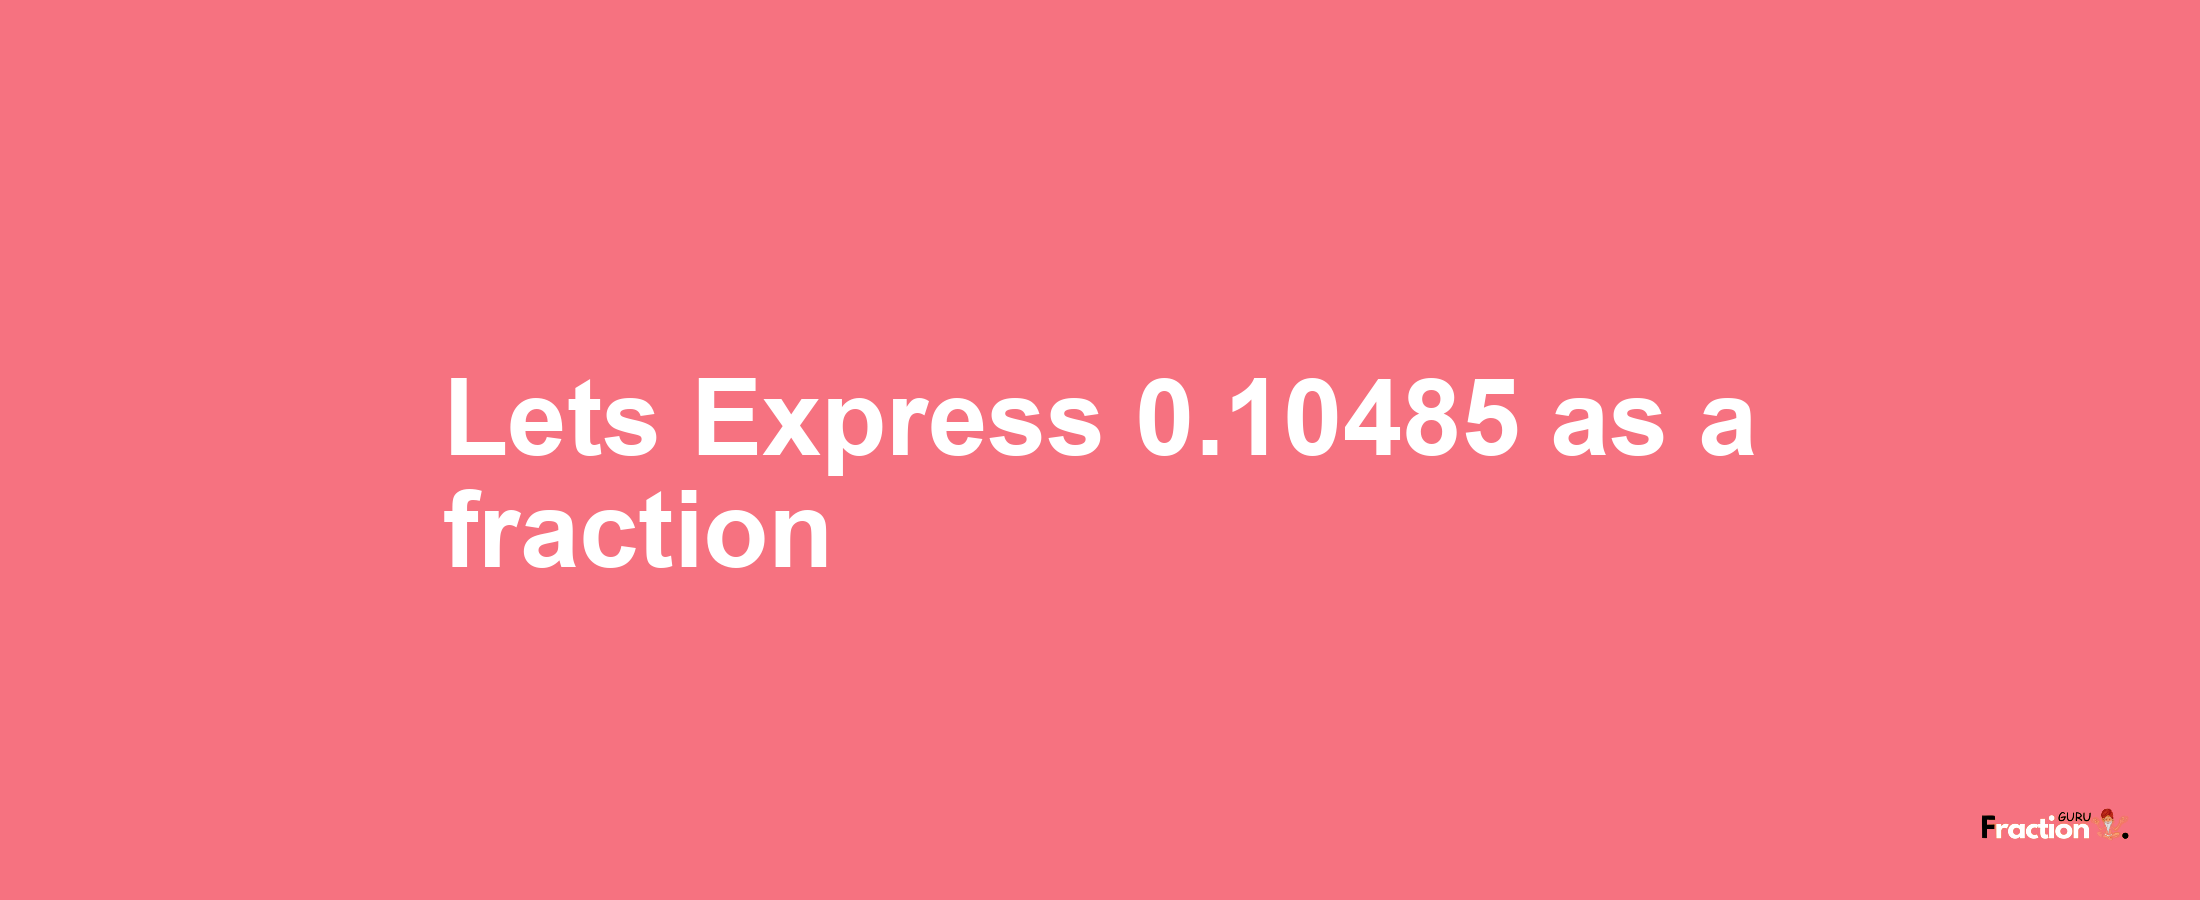 Lets Express 0.10485 as afraction